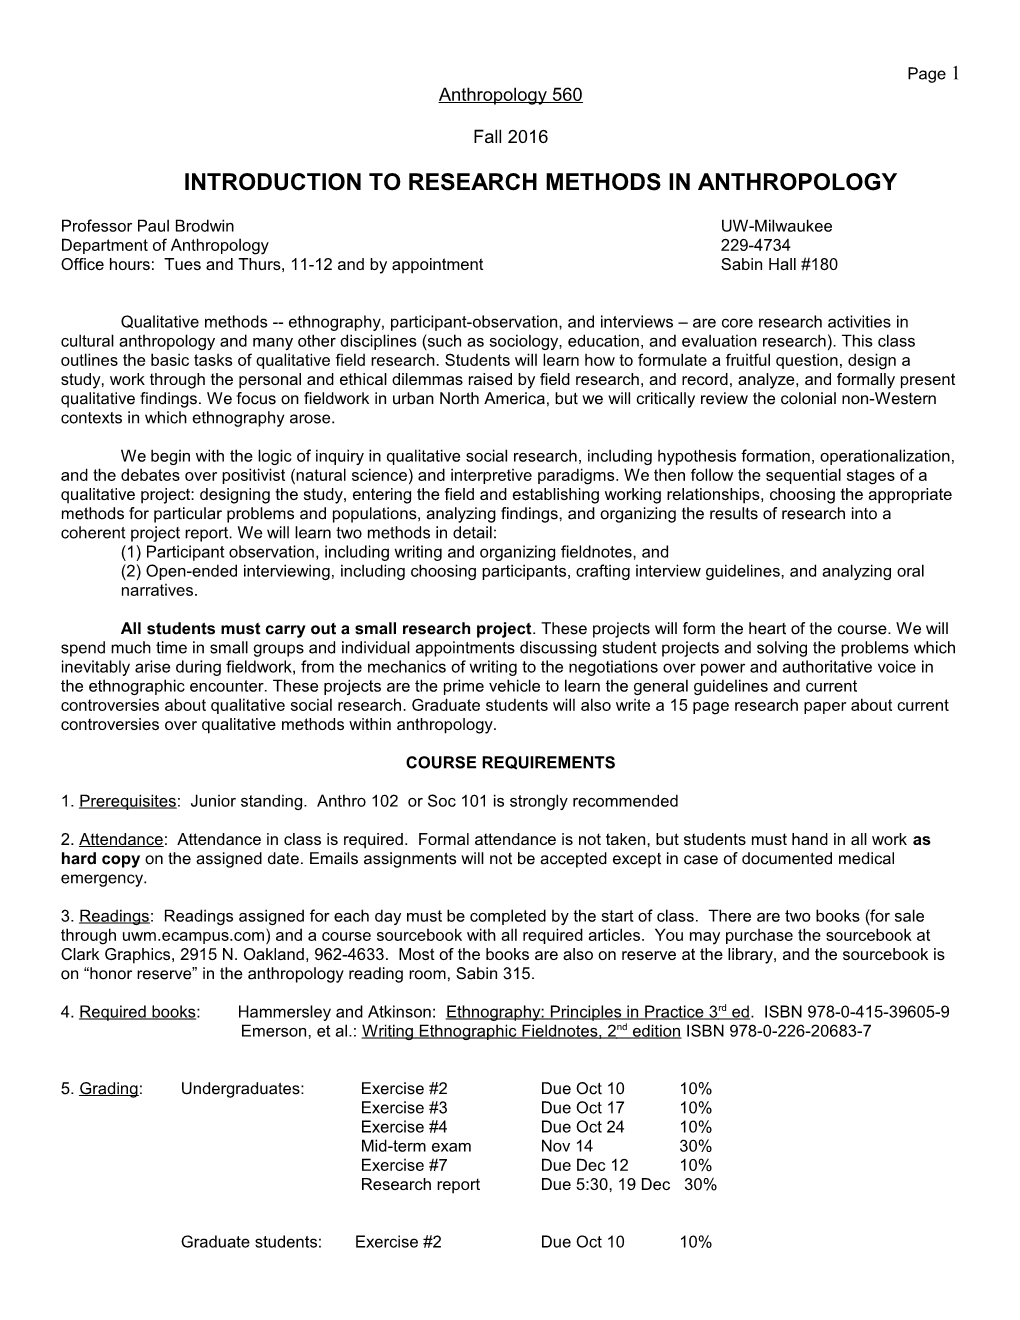 Introduction to Research Methods in Anthropology